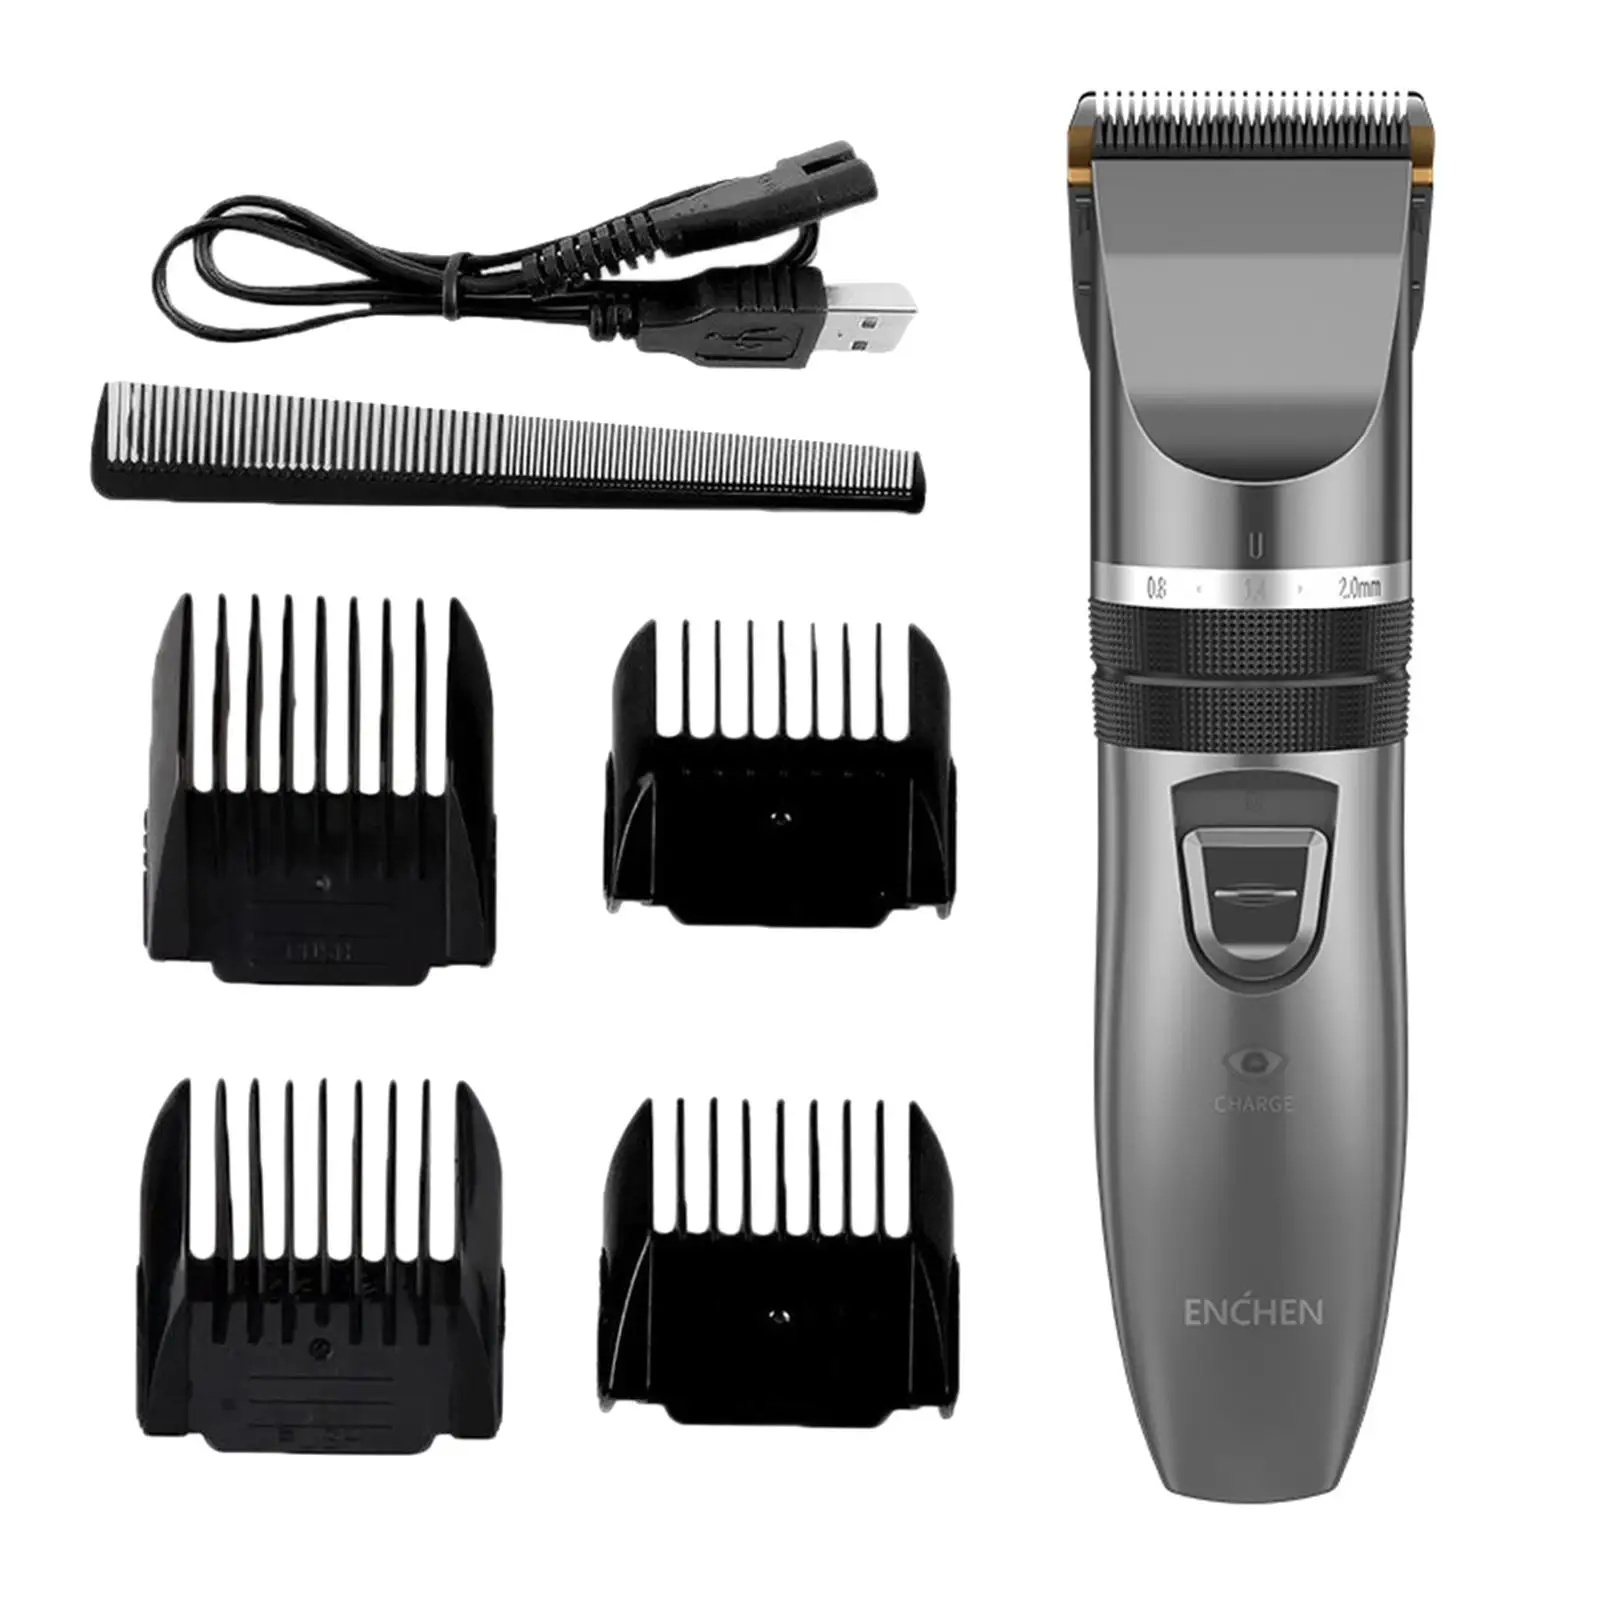 Professional Body Beard Trimmer For Men Cordless Hair Clipper+ 4 Comb Attachment